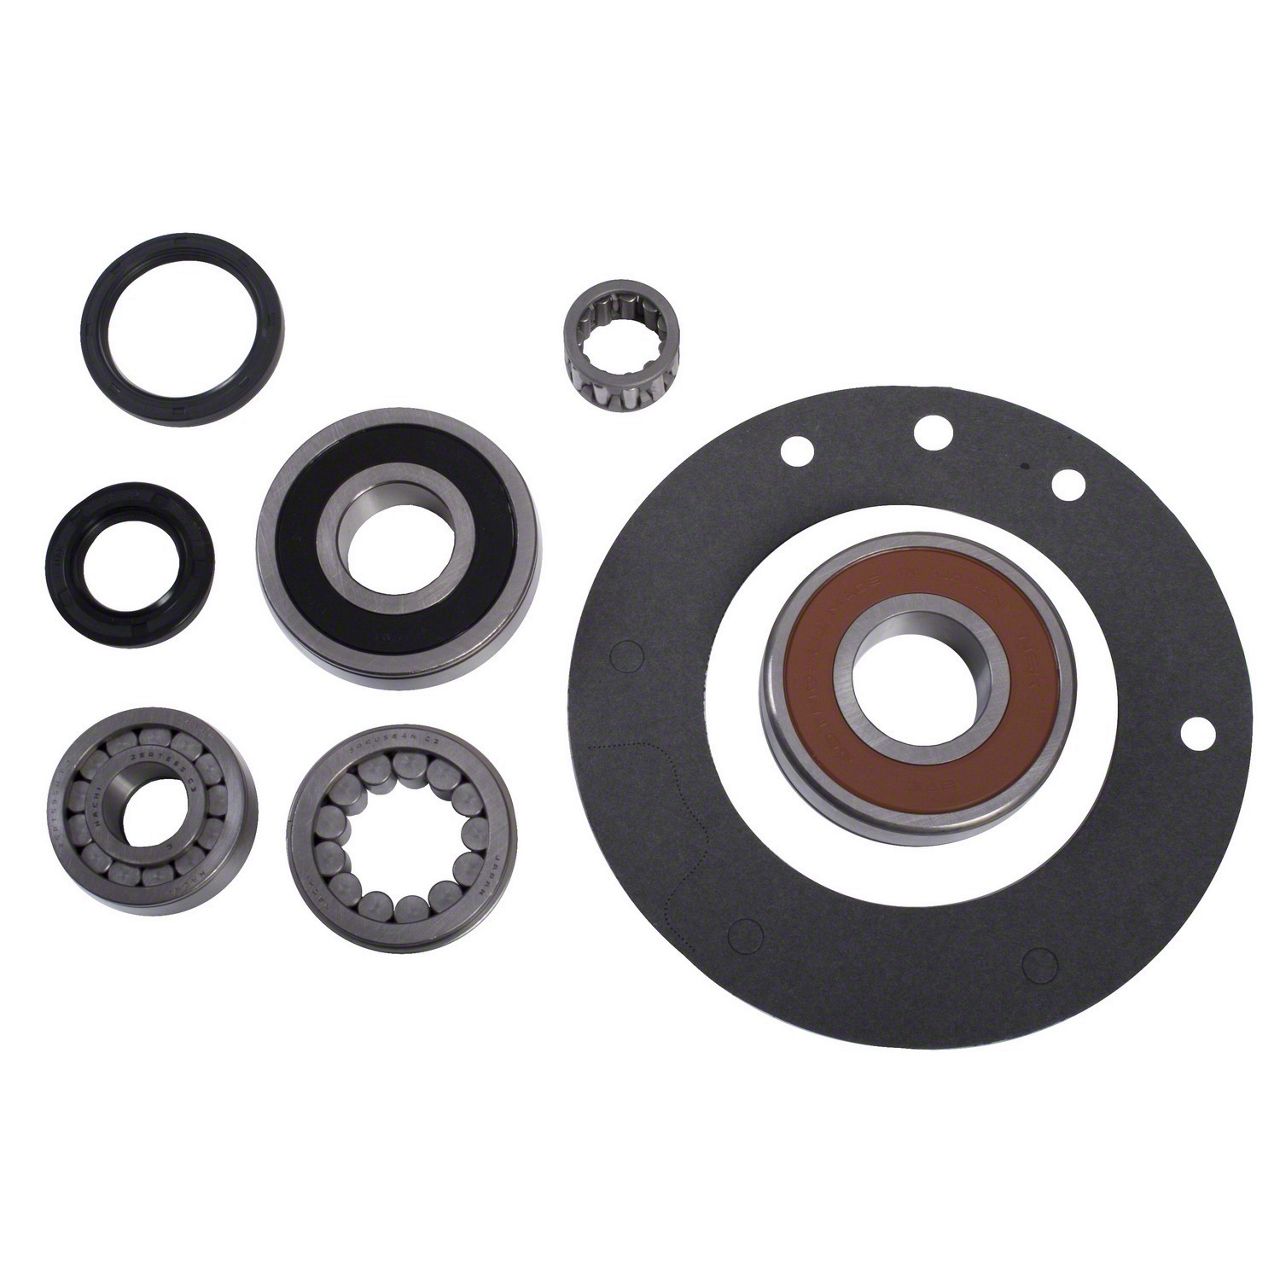 Jeep AX-15 5-Spd Transmission Deluxe Rebuild Kit W/ Needle Bearings 